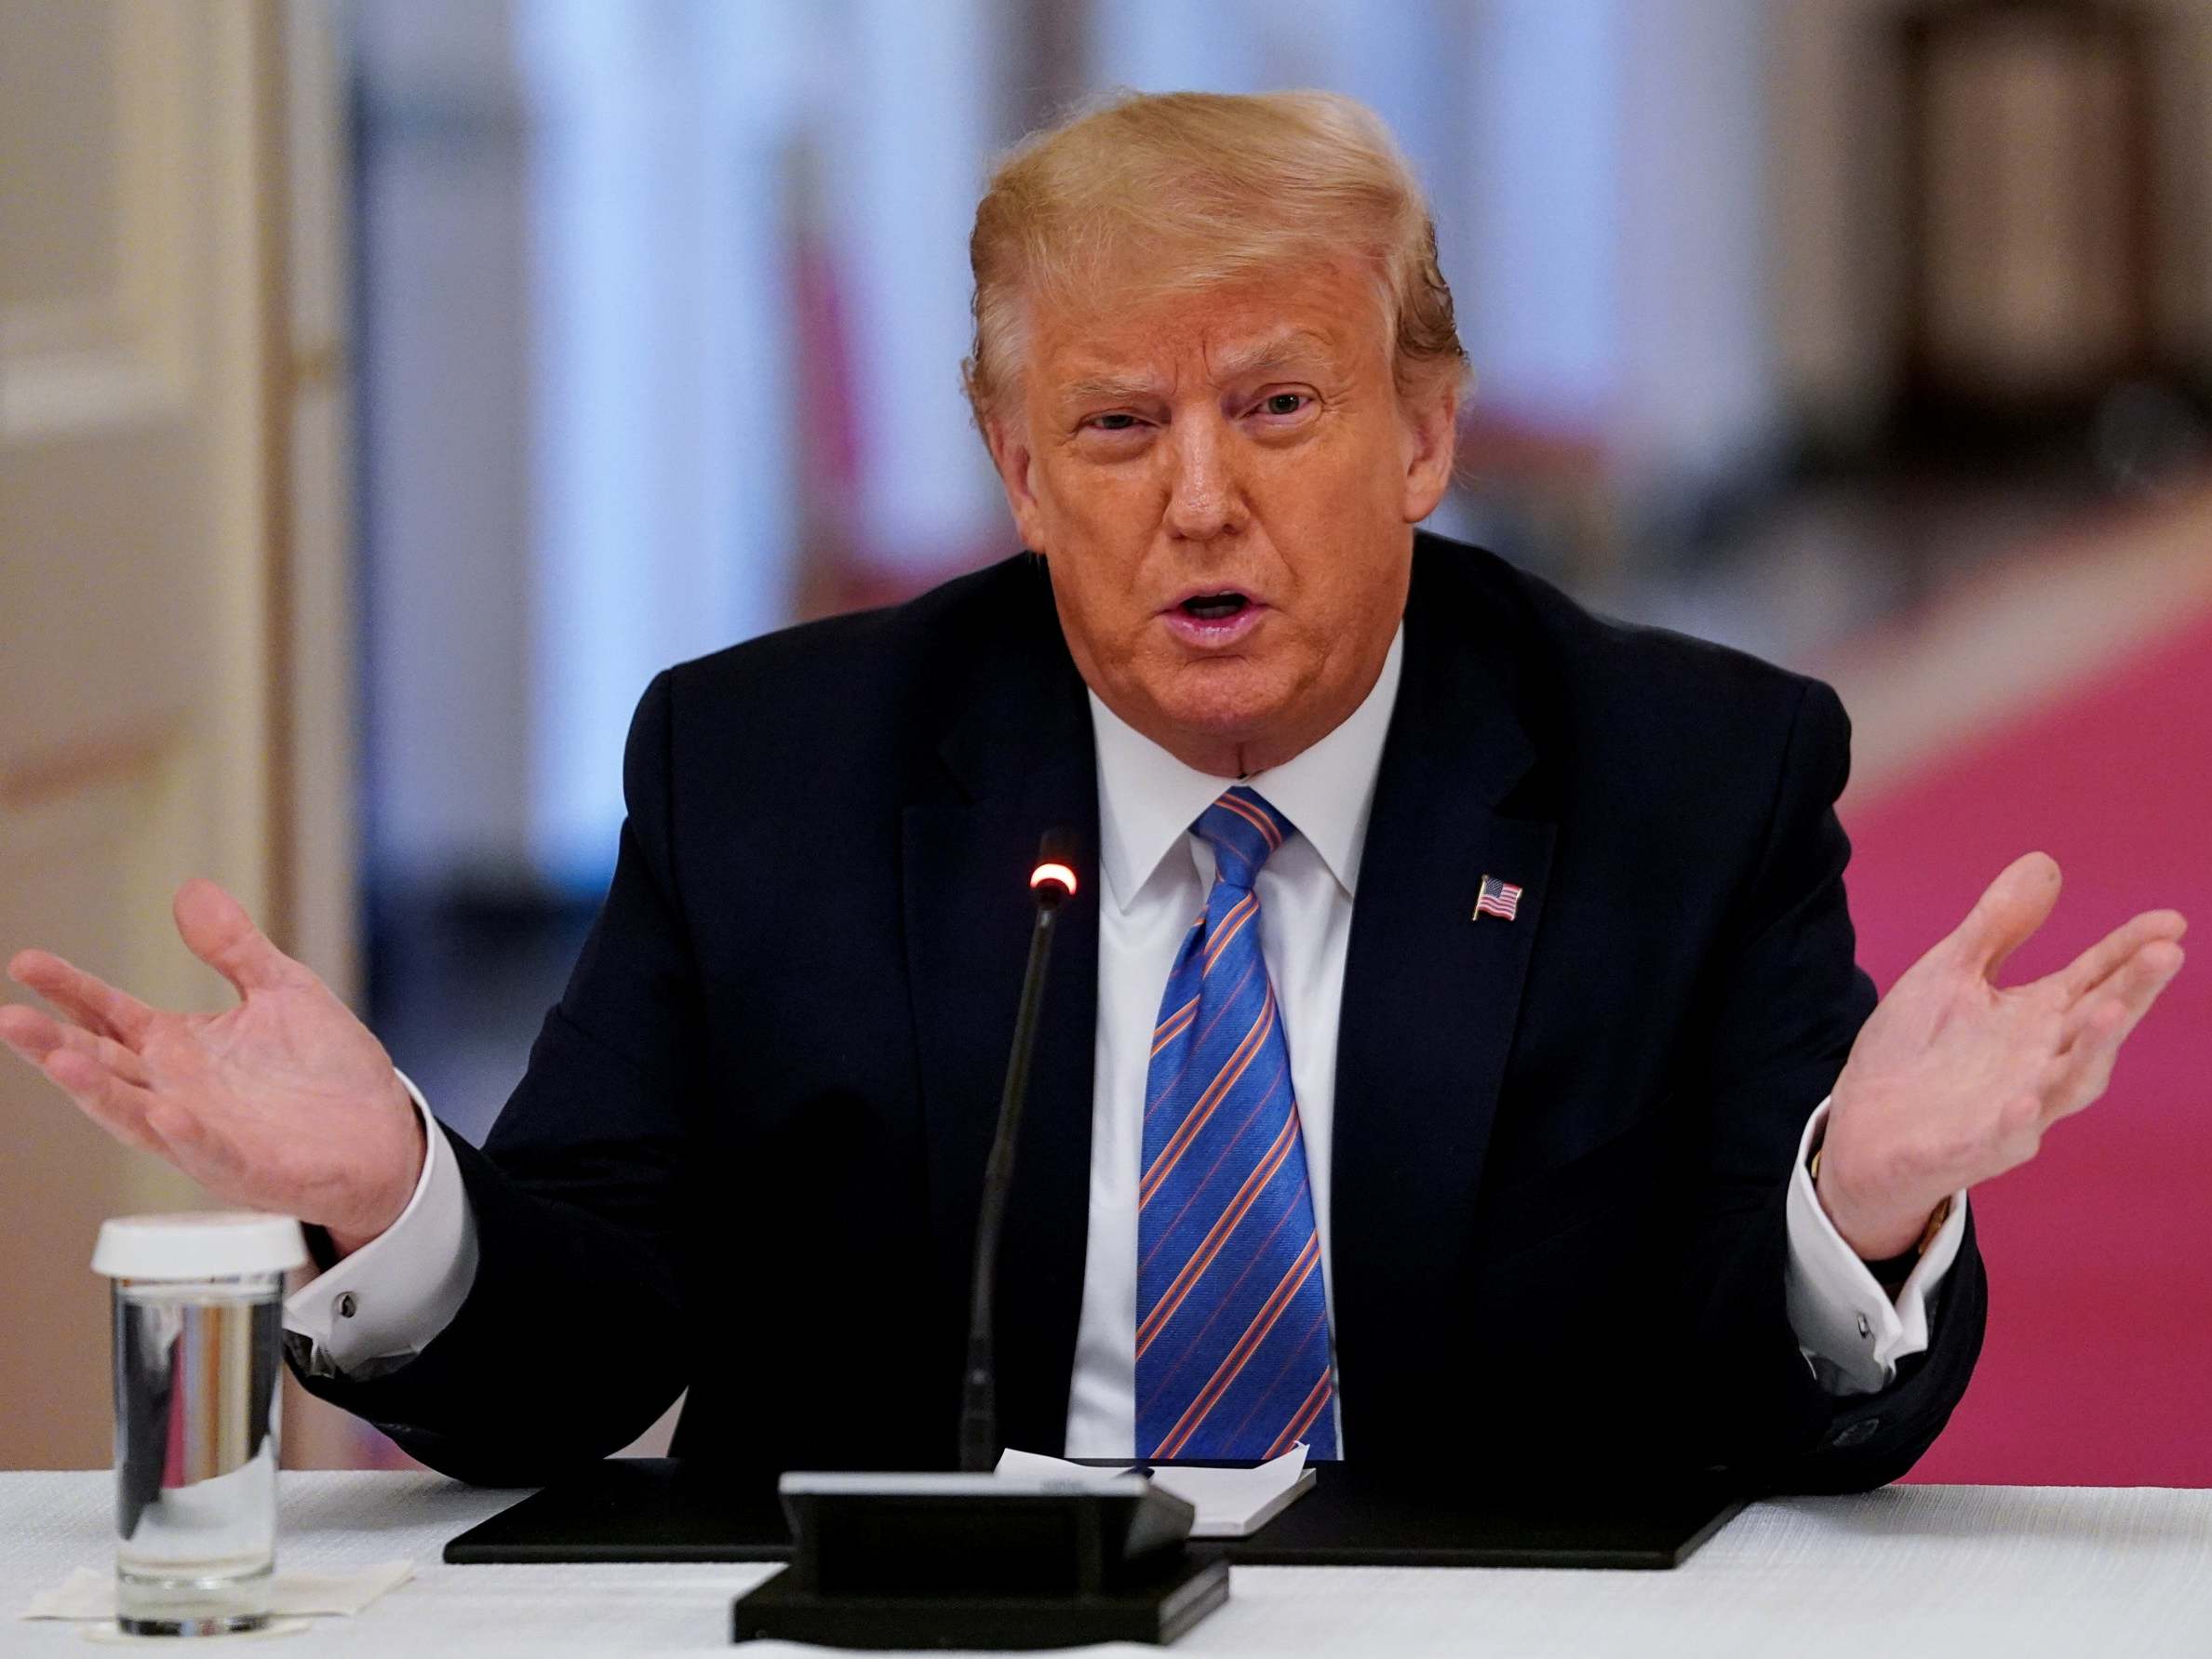 Trump&apos;s attack on Biden&apos;s mental fitness isn&apos;t landing with voters, new poll finds thumbnail